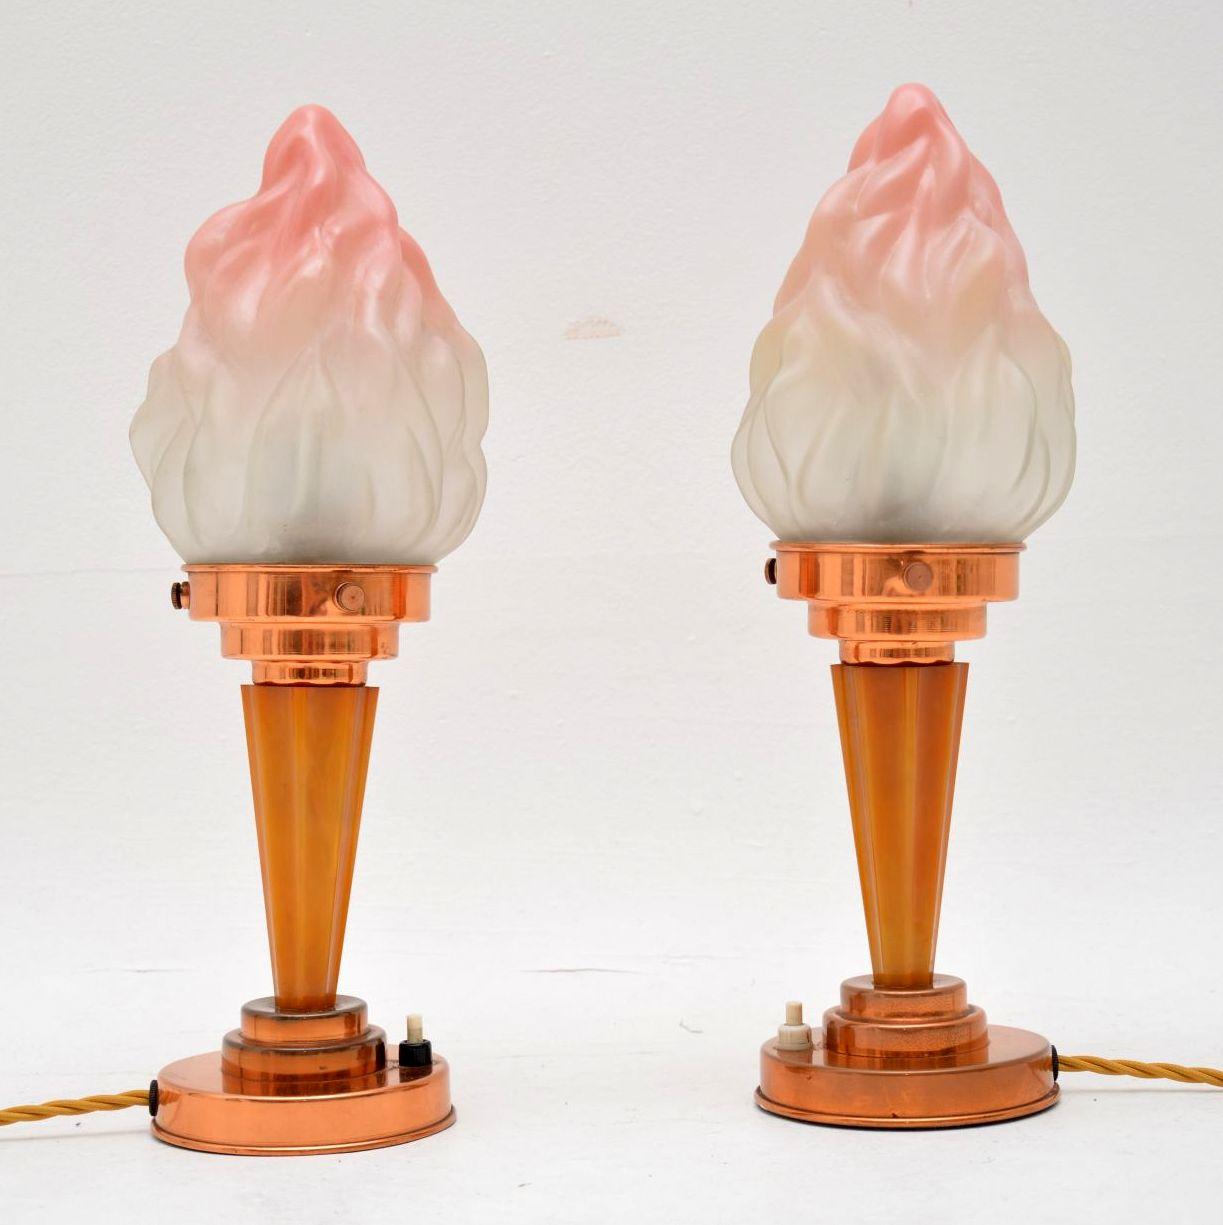 A stunning and rare pair of original Art Deco period table lamps with beautiful glass shades and Bakelite bases. They date from the 1930’s, and are in superb original condition. The coloured glass shades have no chips or cracks, they have both been